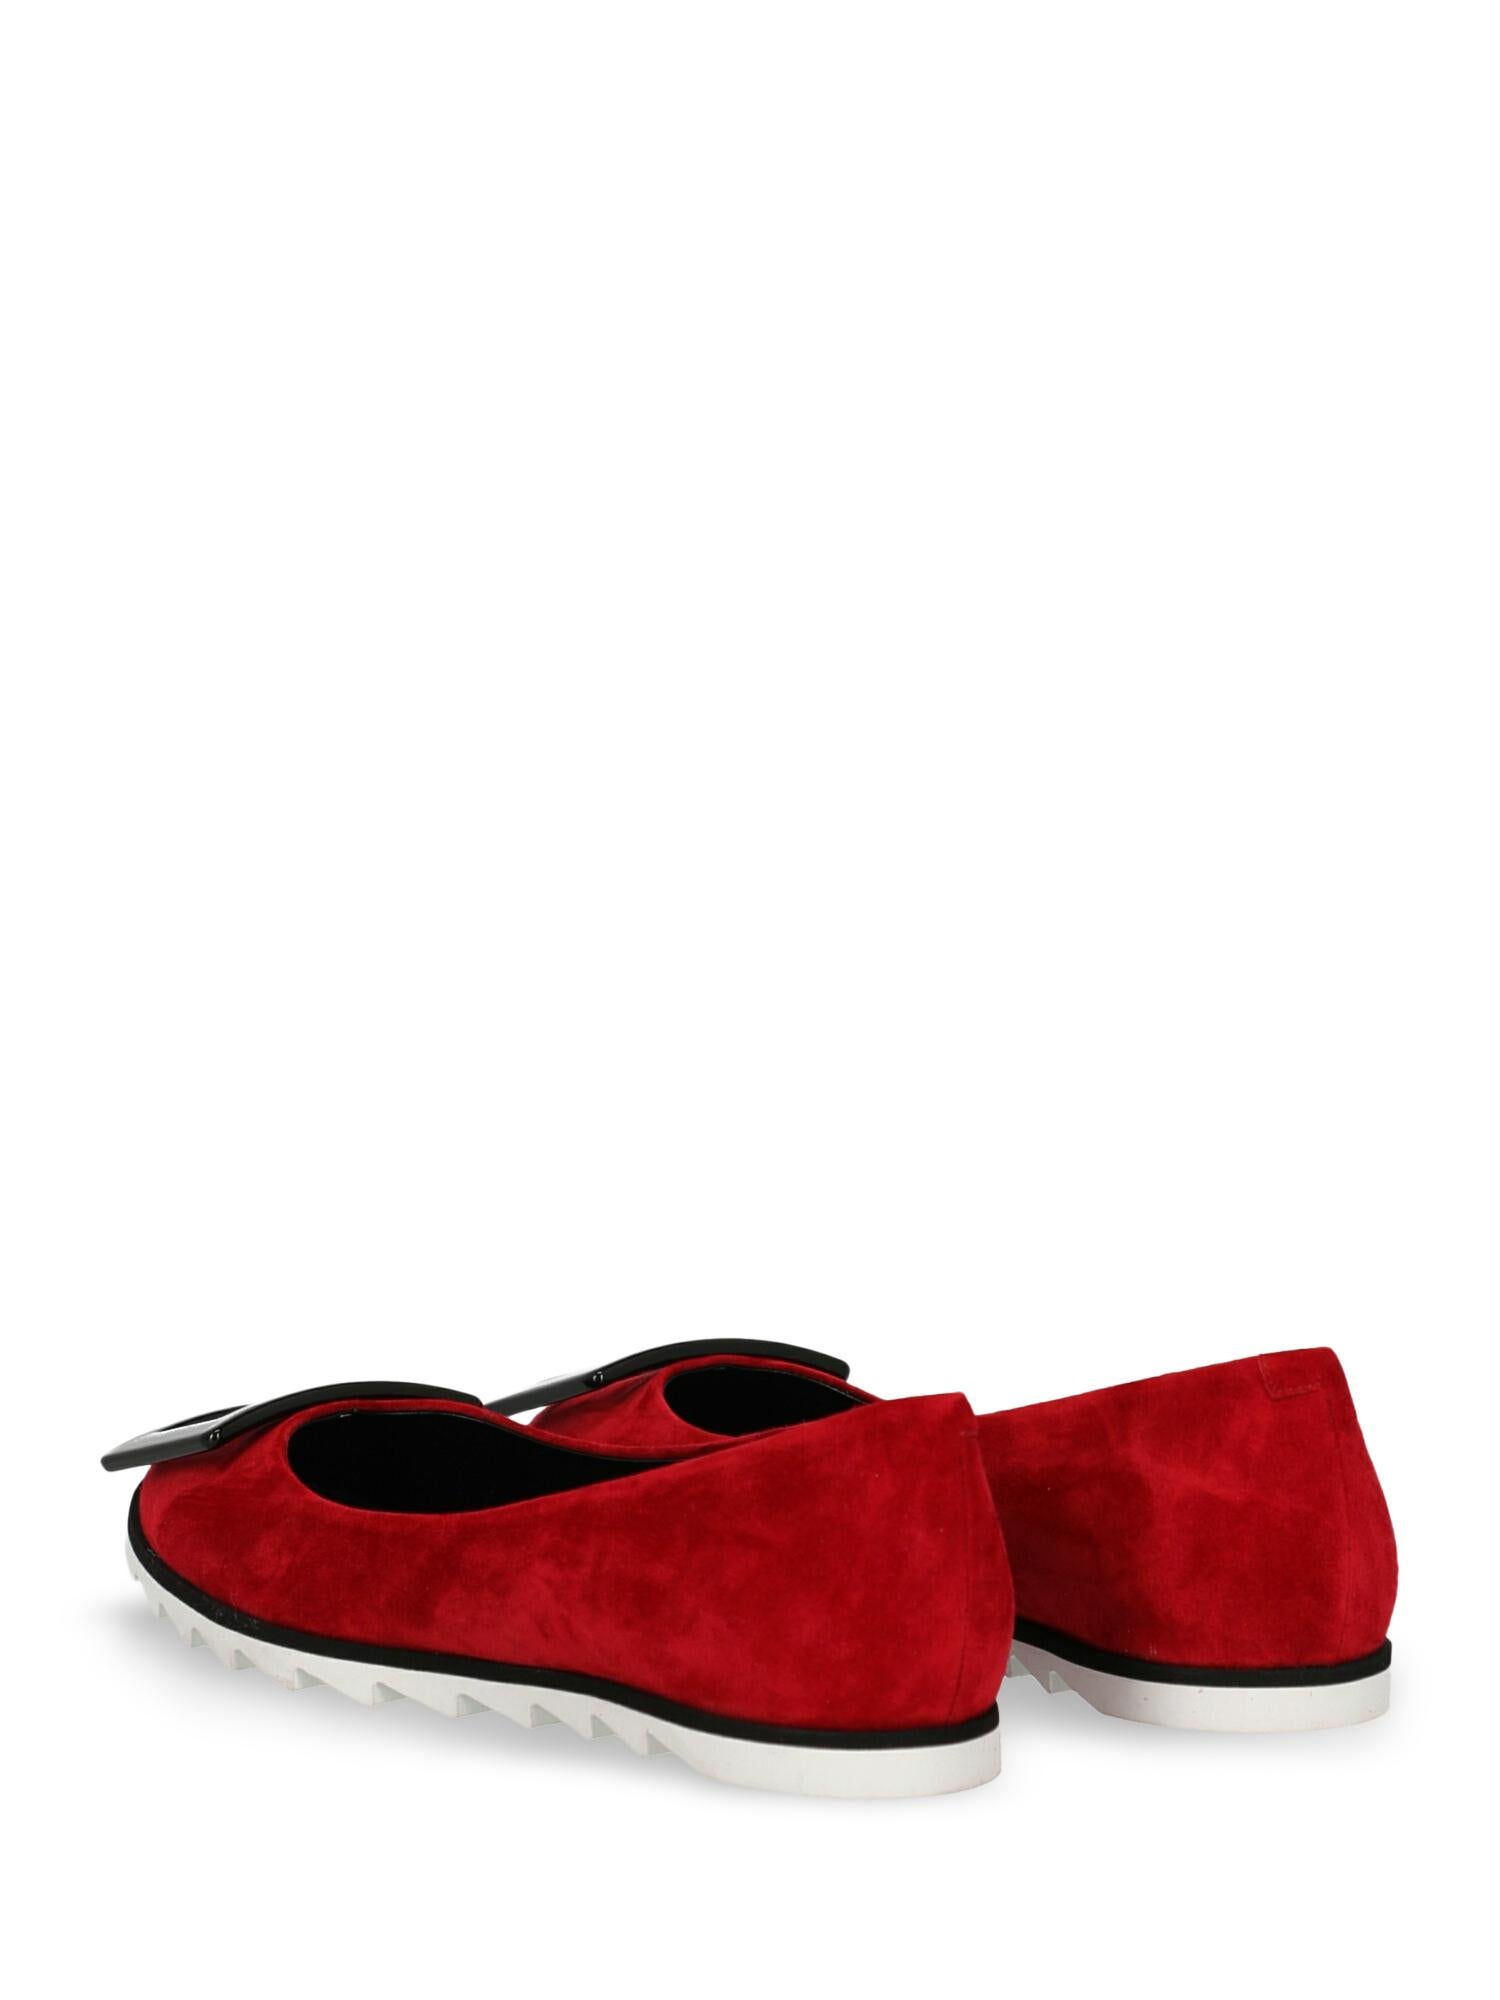 Roger Vivier Woman Ballet flats Red EU 35 In Excellent Condition For Sale In Milan, IT